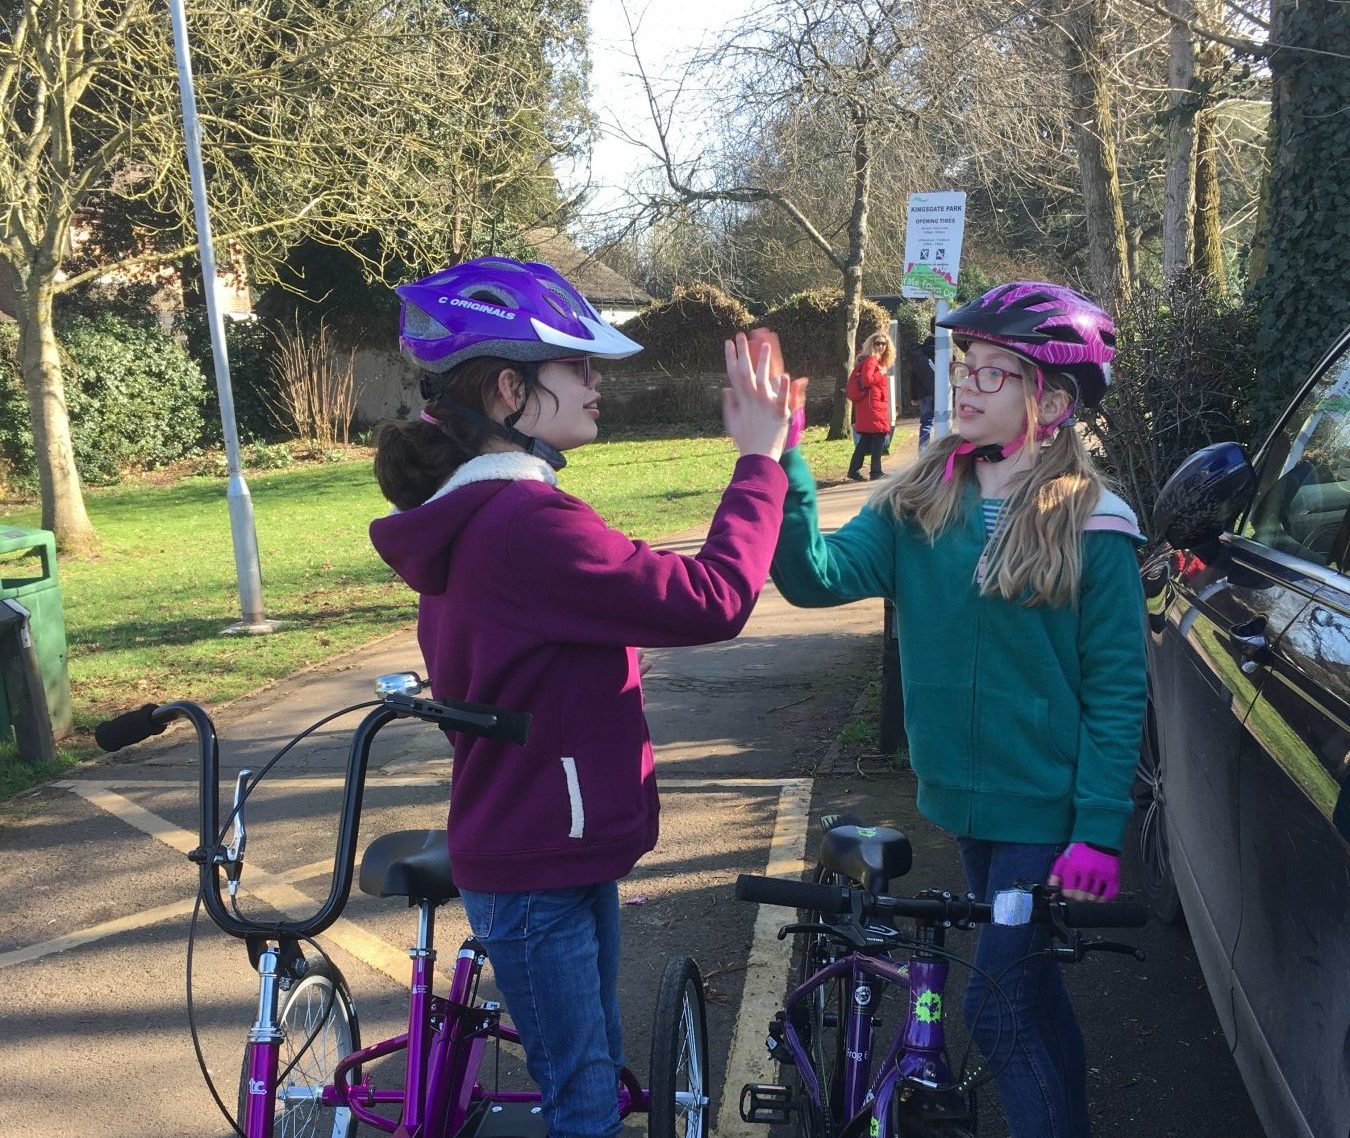 Two children standing astride bikes - one is traditional, one is a Tomcat trike - high-fiving.